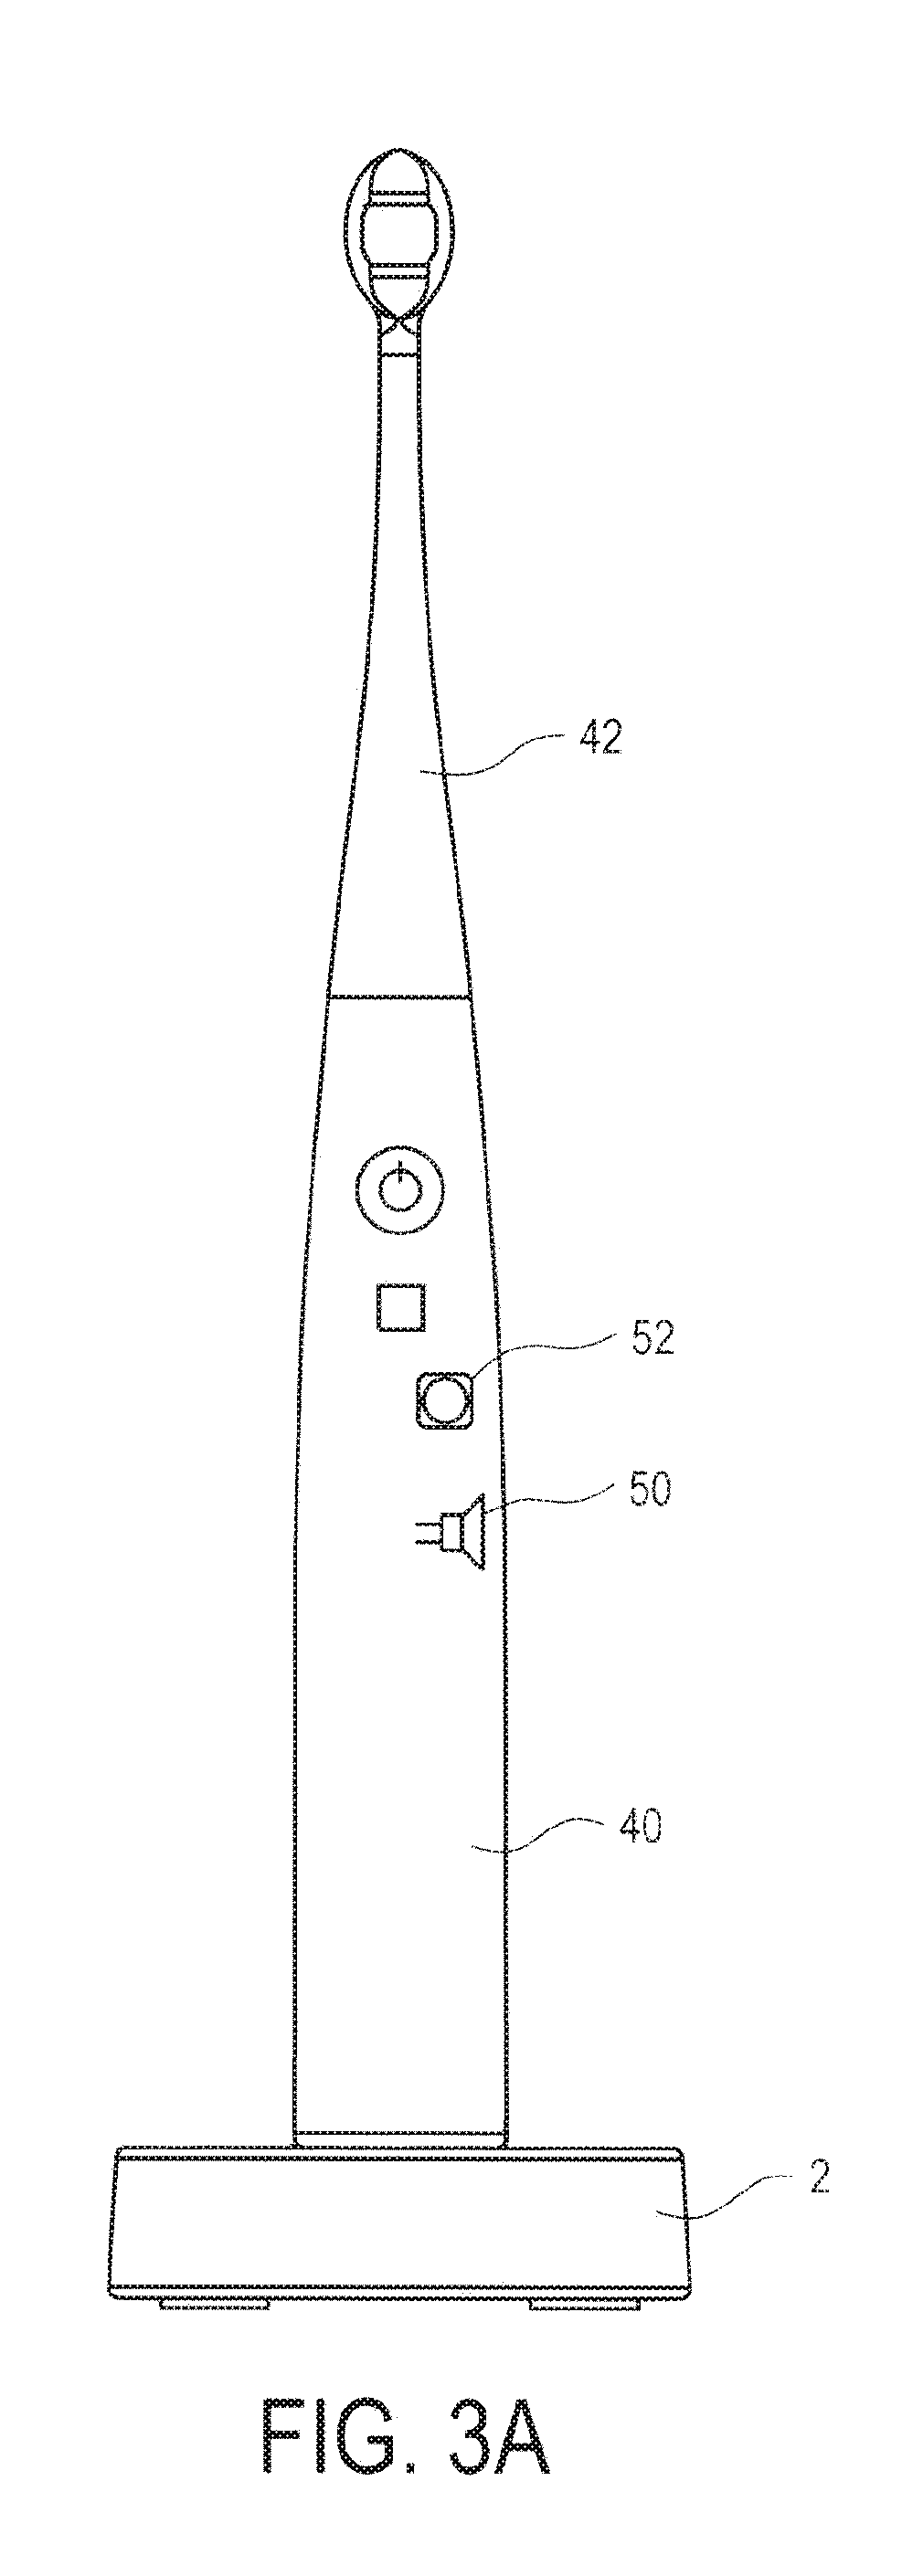 Toothbrush system with sensors for a dental hygiene monitoring system